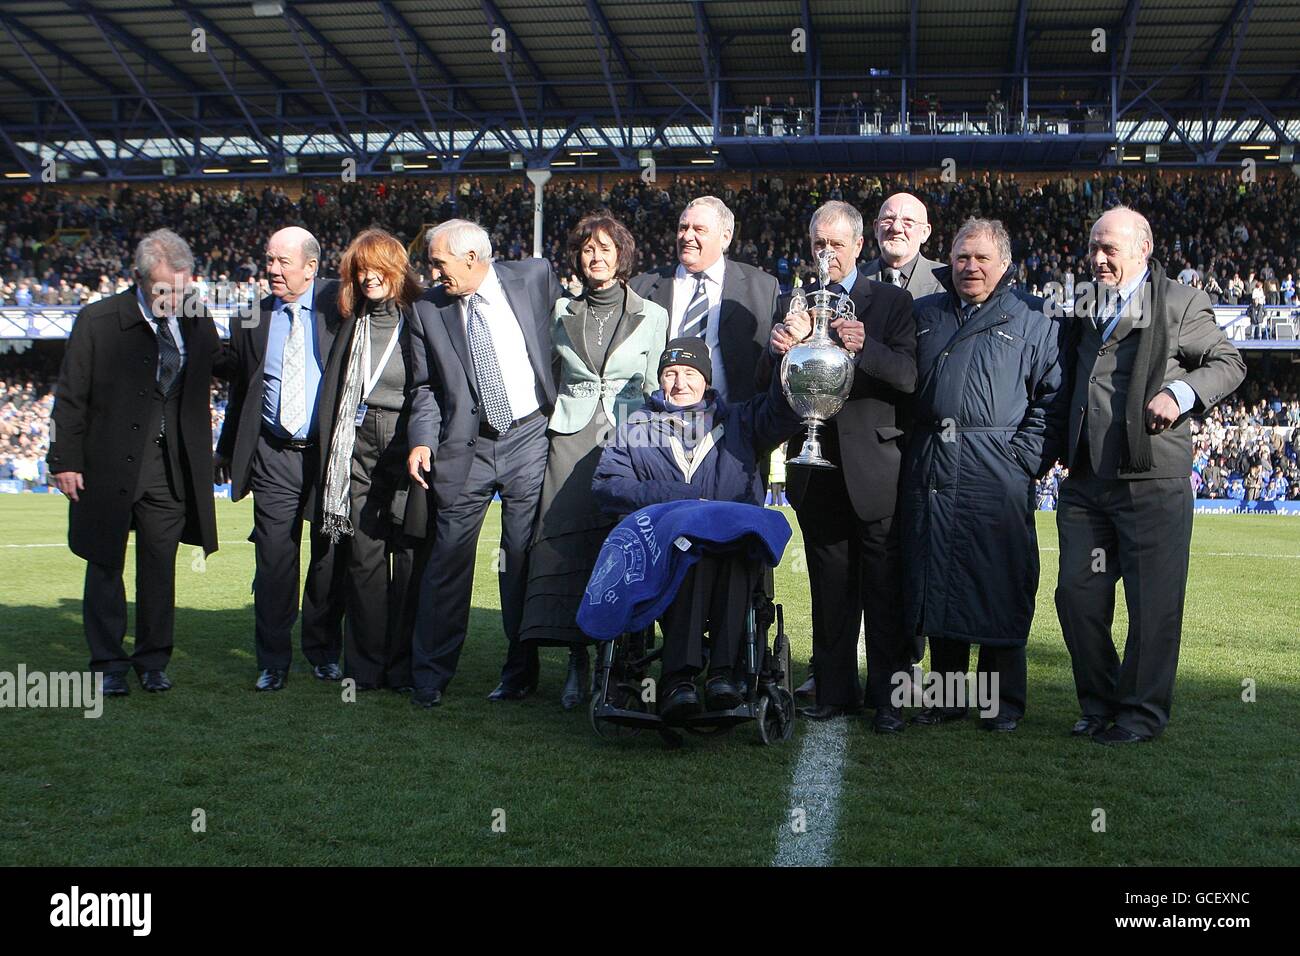 Soccer - Barclays Premier League - Everton v West Ham United - Goodison Park. Members of the 1969/1970 First Division Championship winning squad are presented to fans at half time Stock Photo